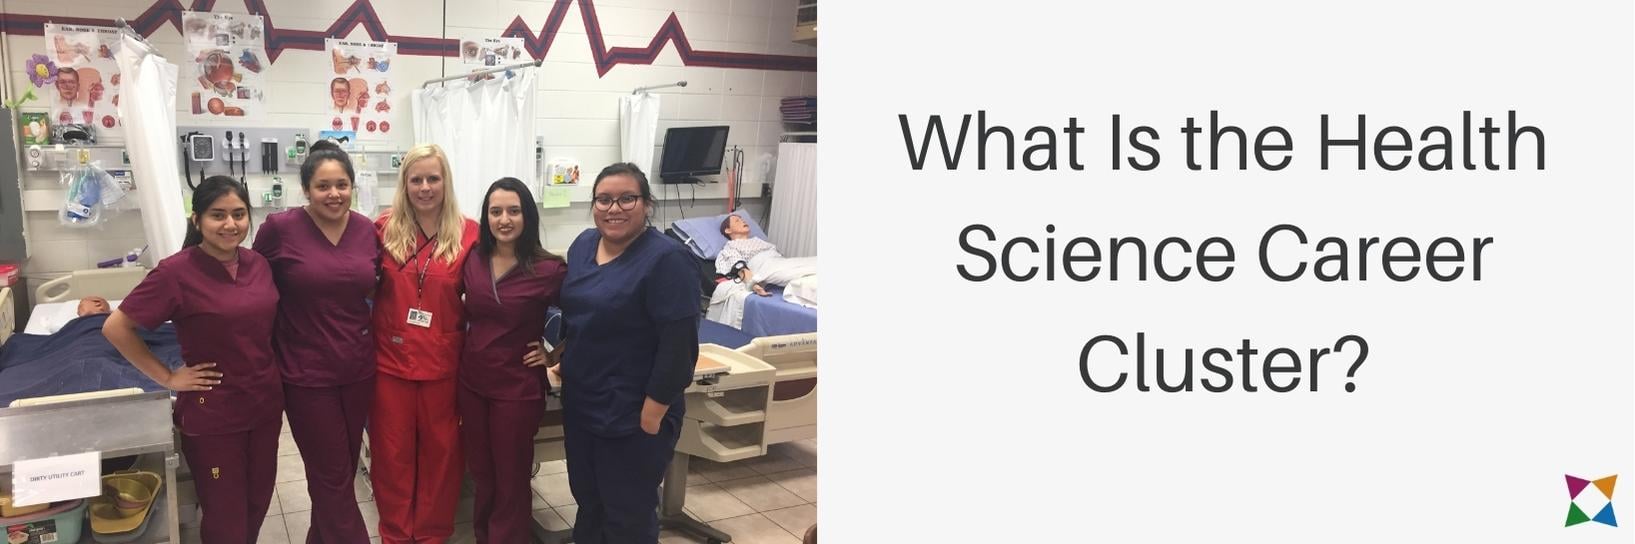 What Is the Health Science Career Cluster?